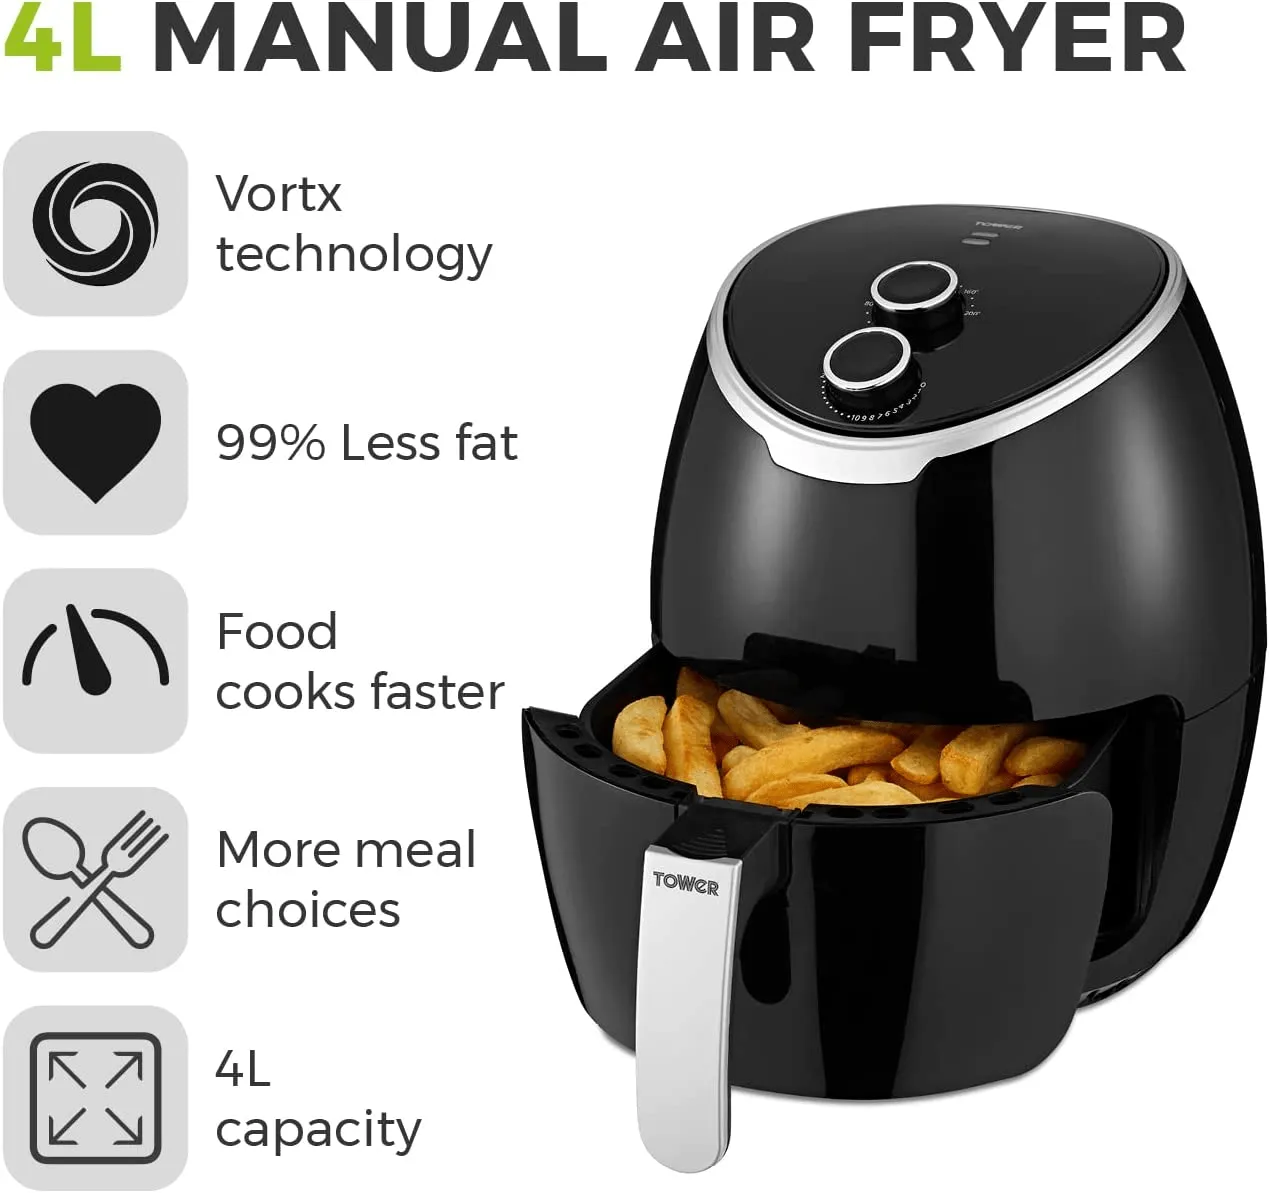 Manual Air Fryer Oven